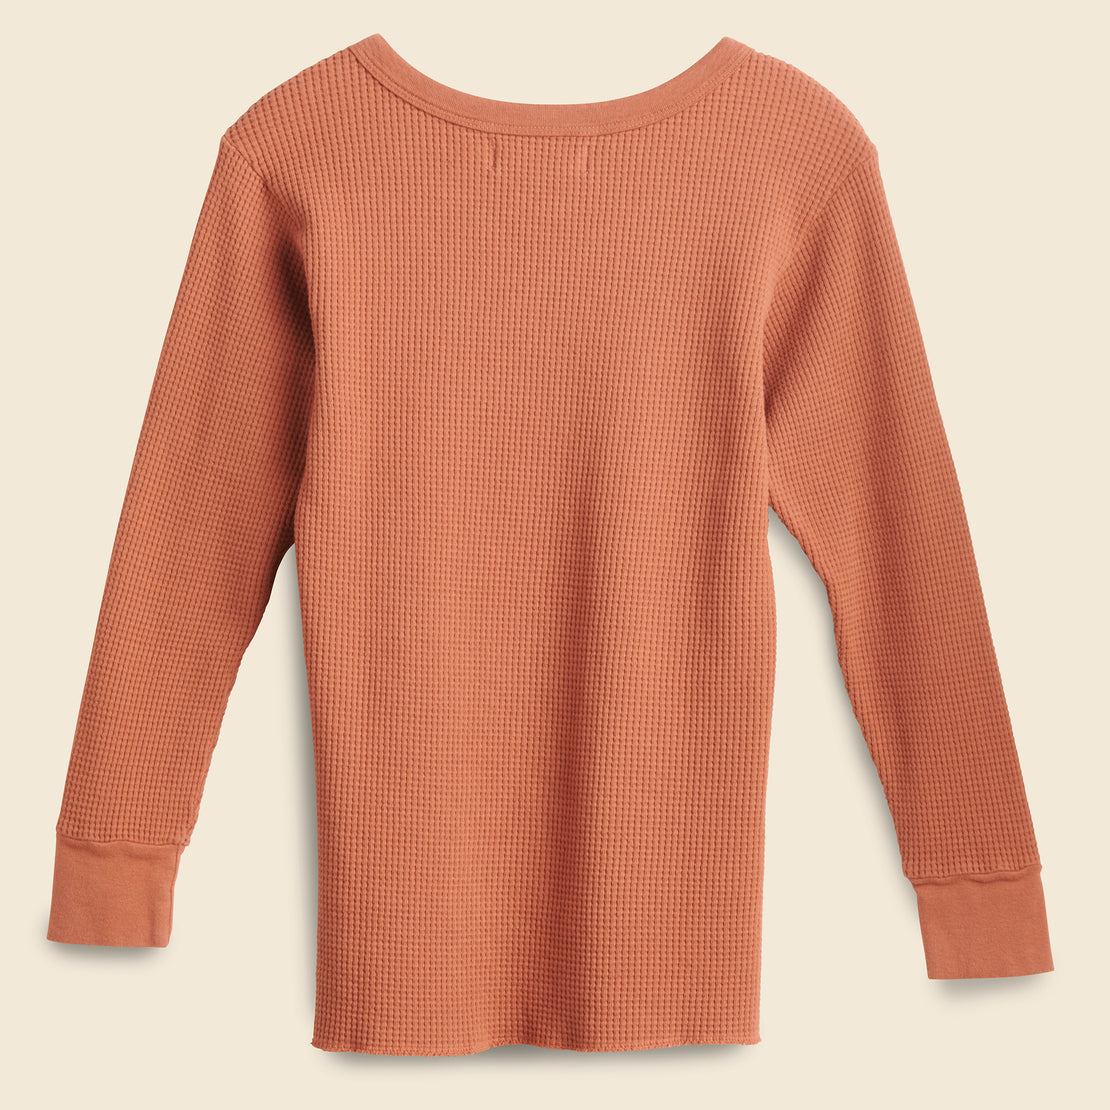 Waffle Thermal Tee - Monarch - Imogene + Willie - STAG Provisions - W - Tops - L/S Tee